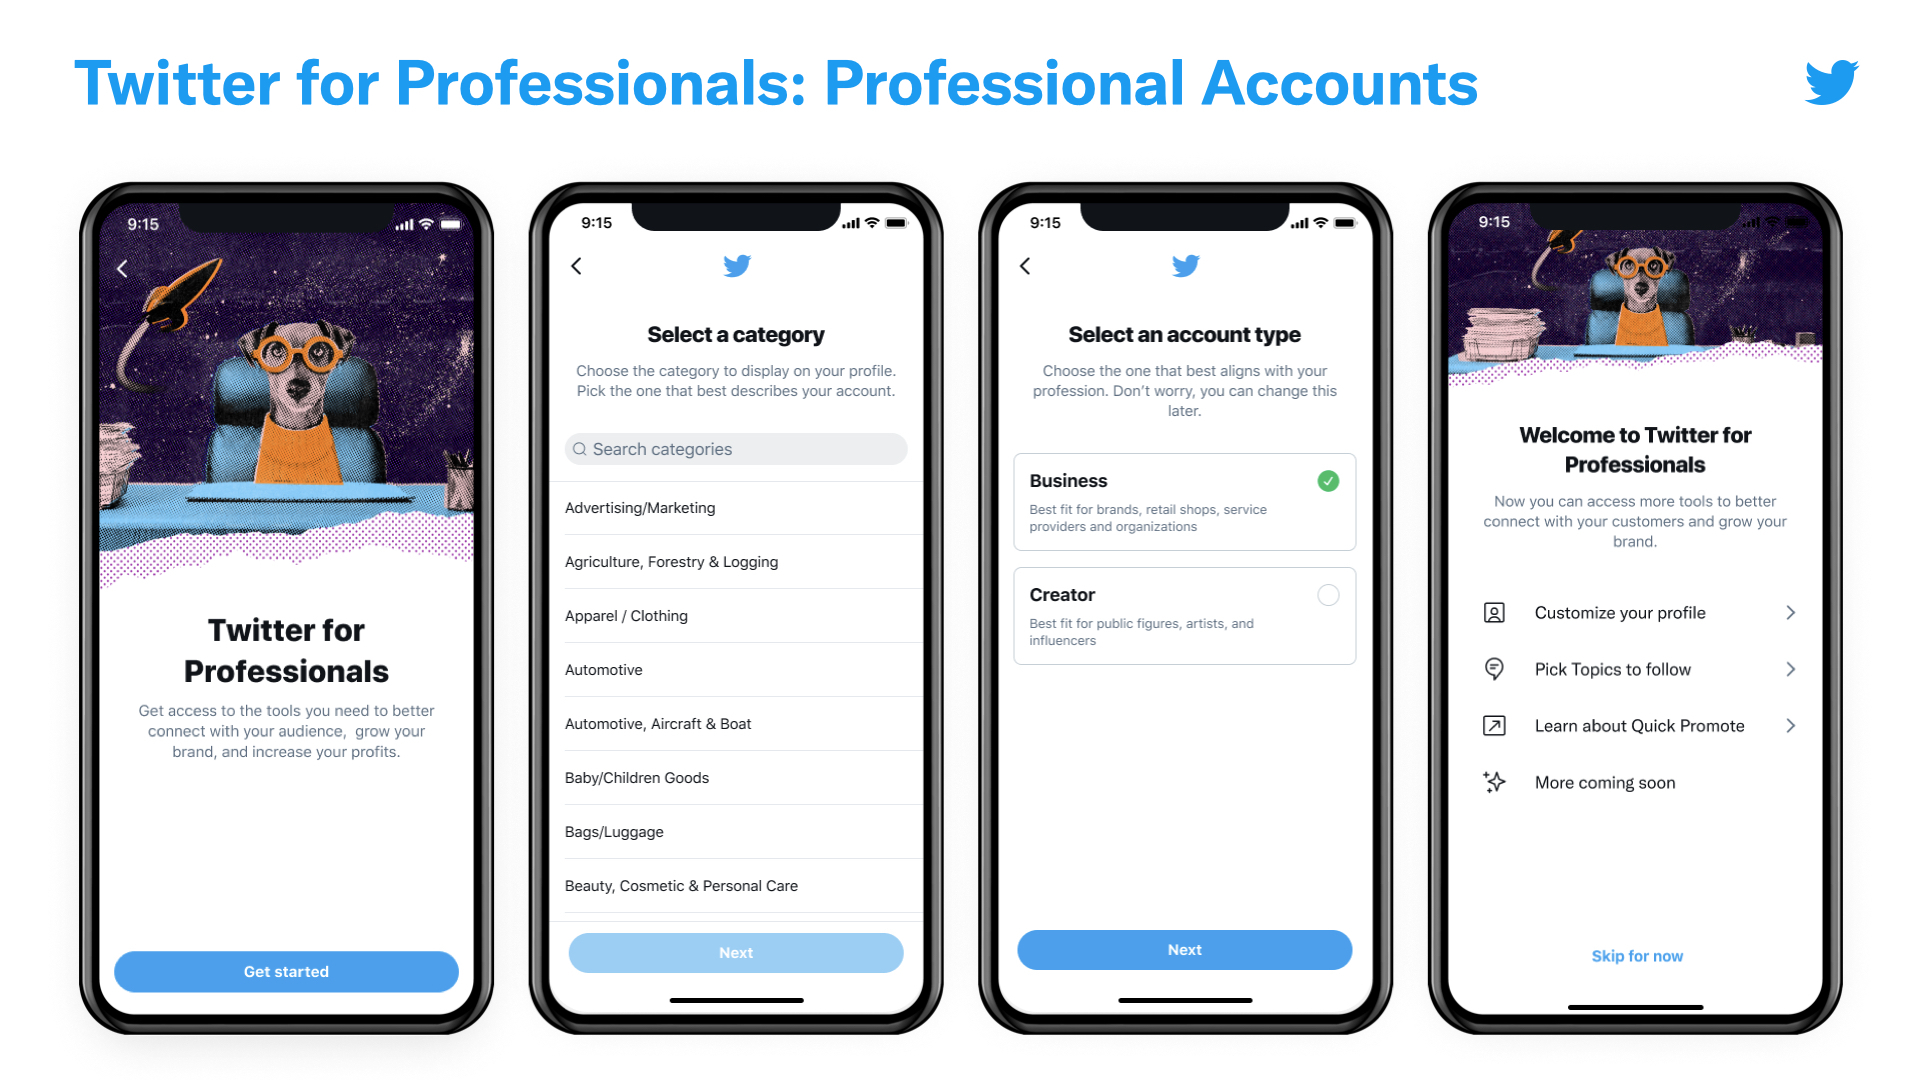 Twitter targets businesses and creators with its latest Professional feature